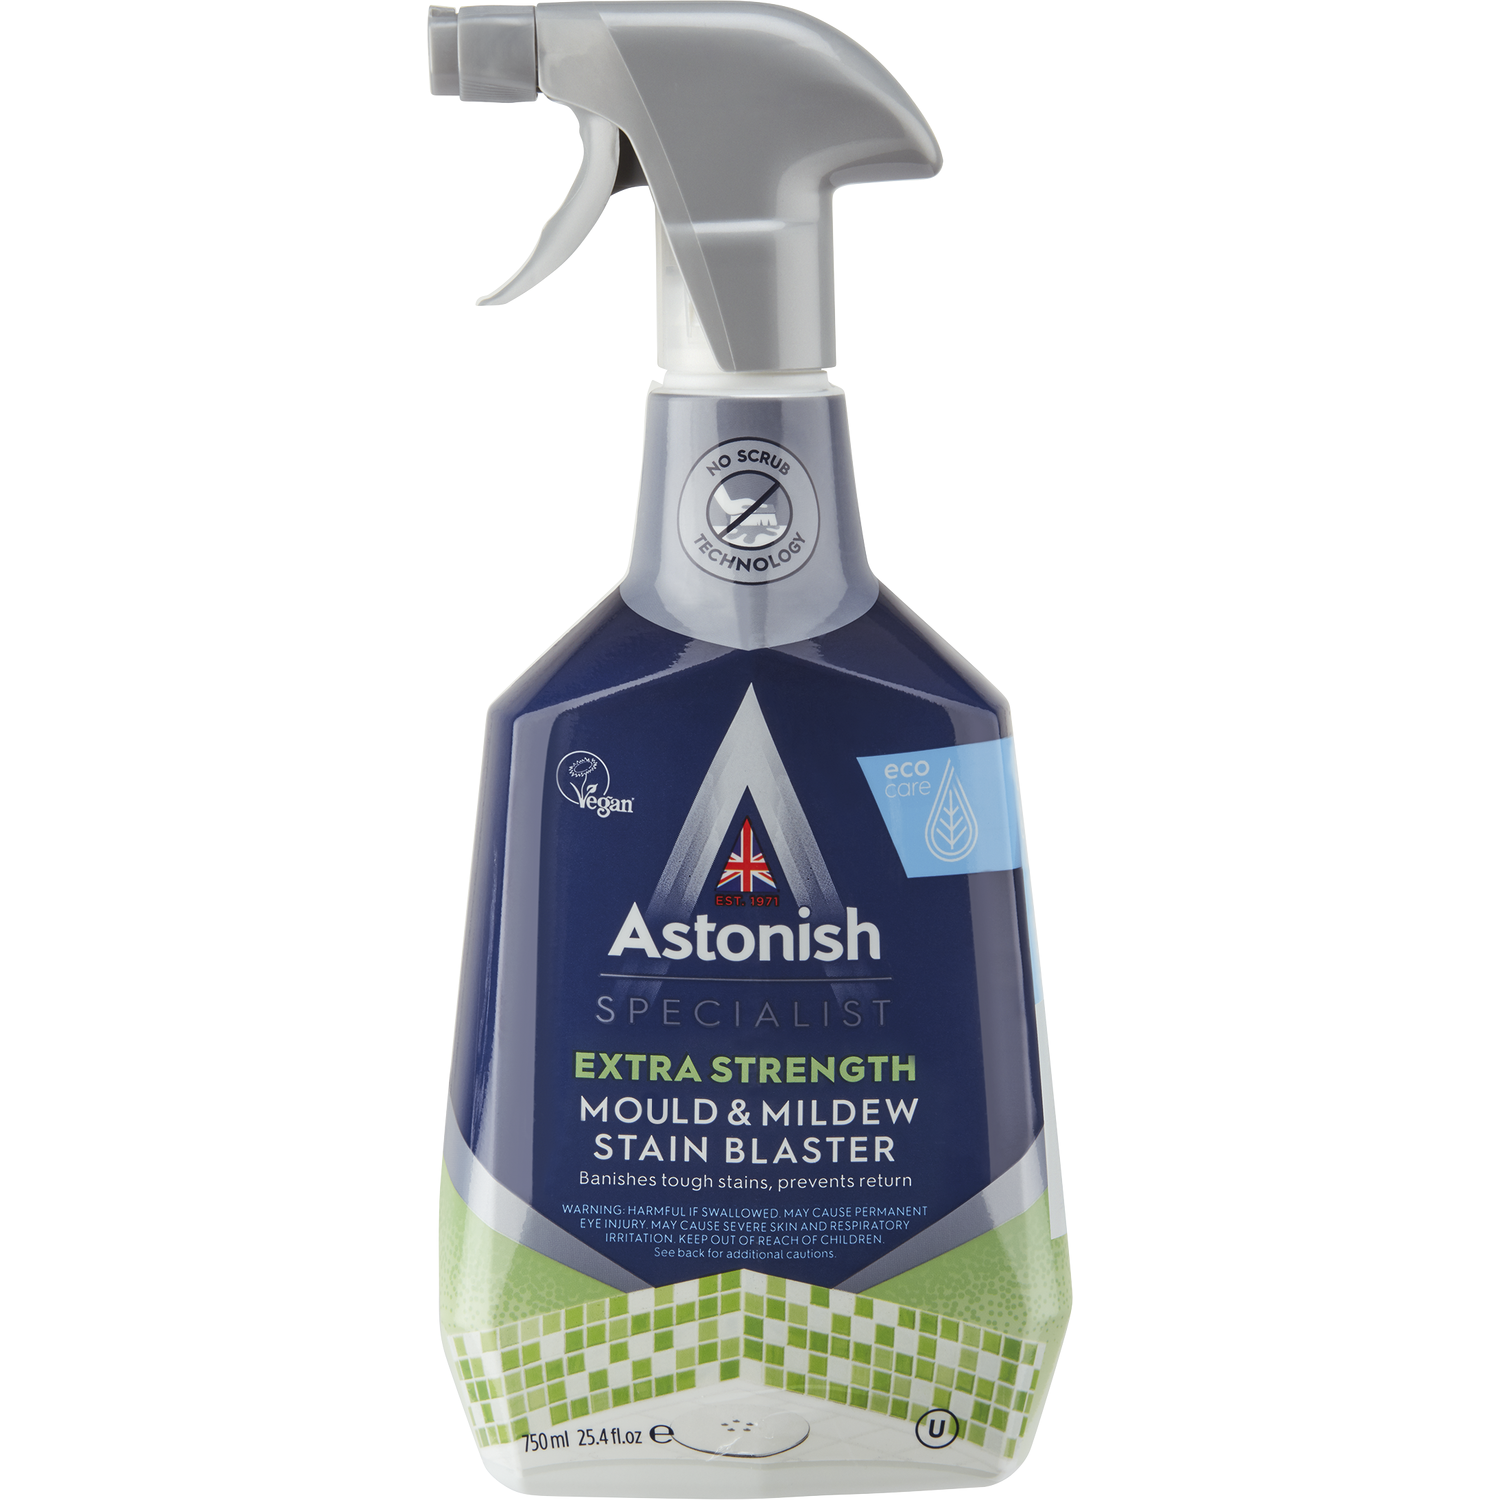 Astonish Mould and Mildew Stain Blaster 750ml Image